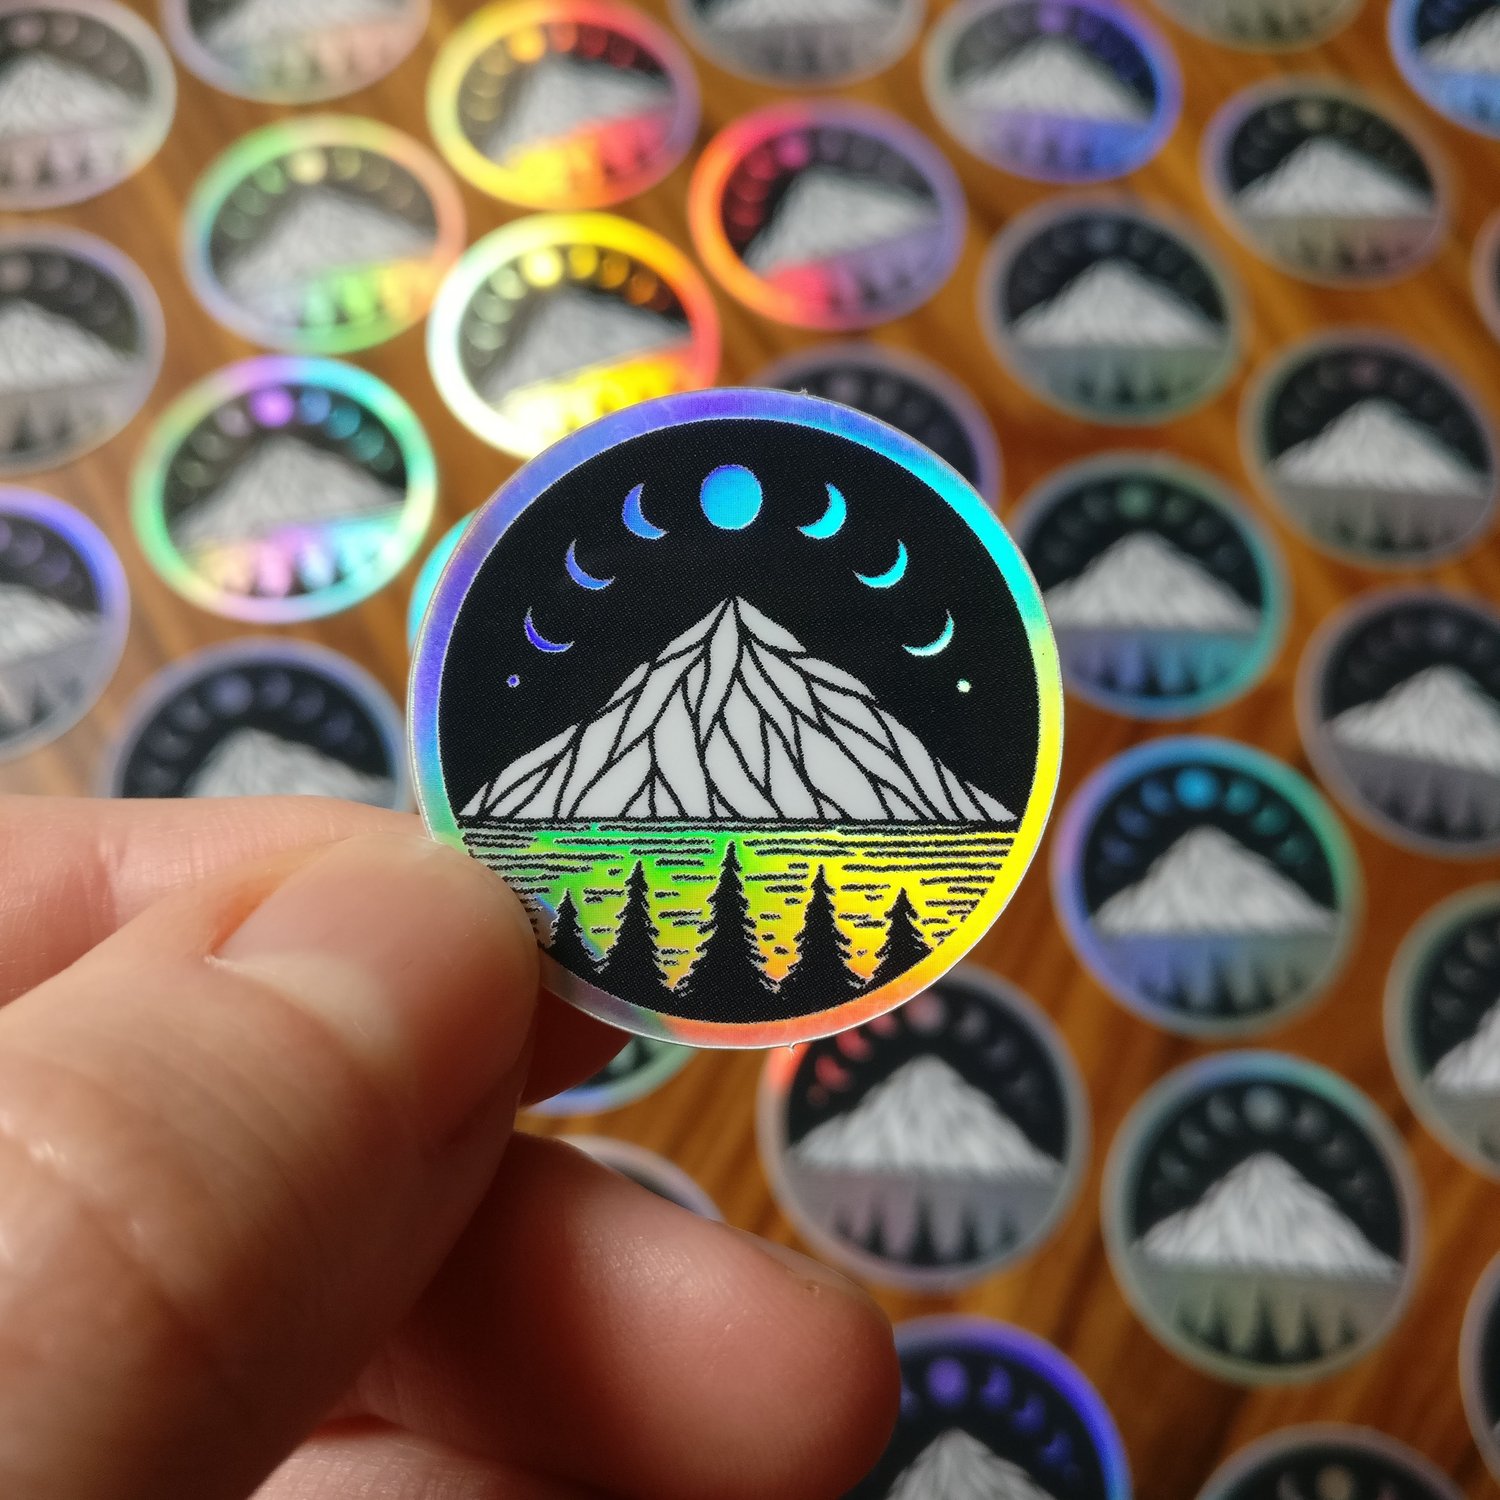 Mini Sticker Moon Phases - holographic